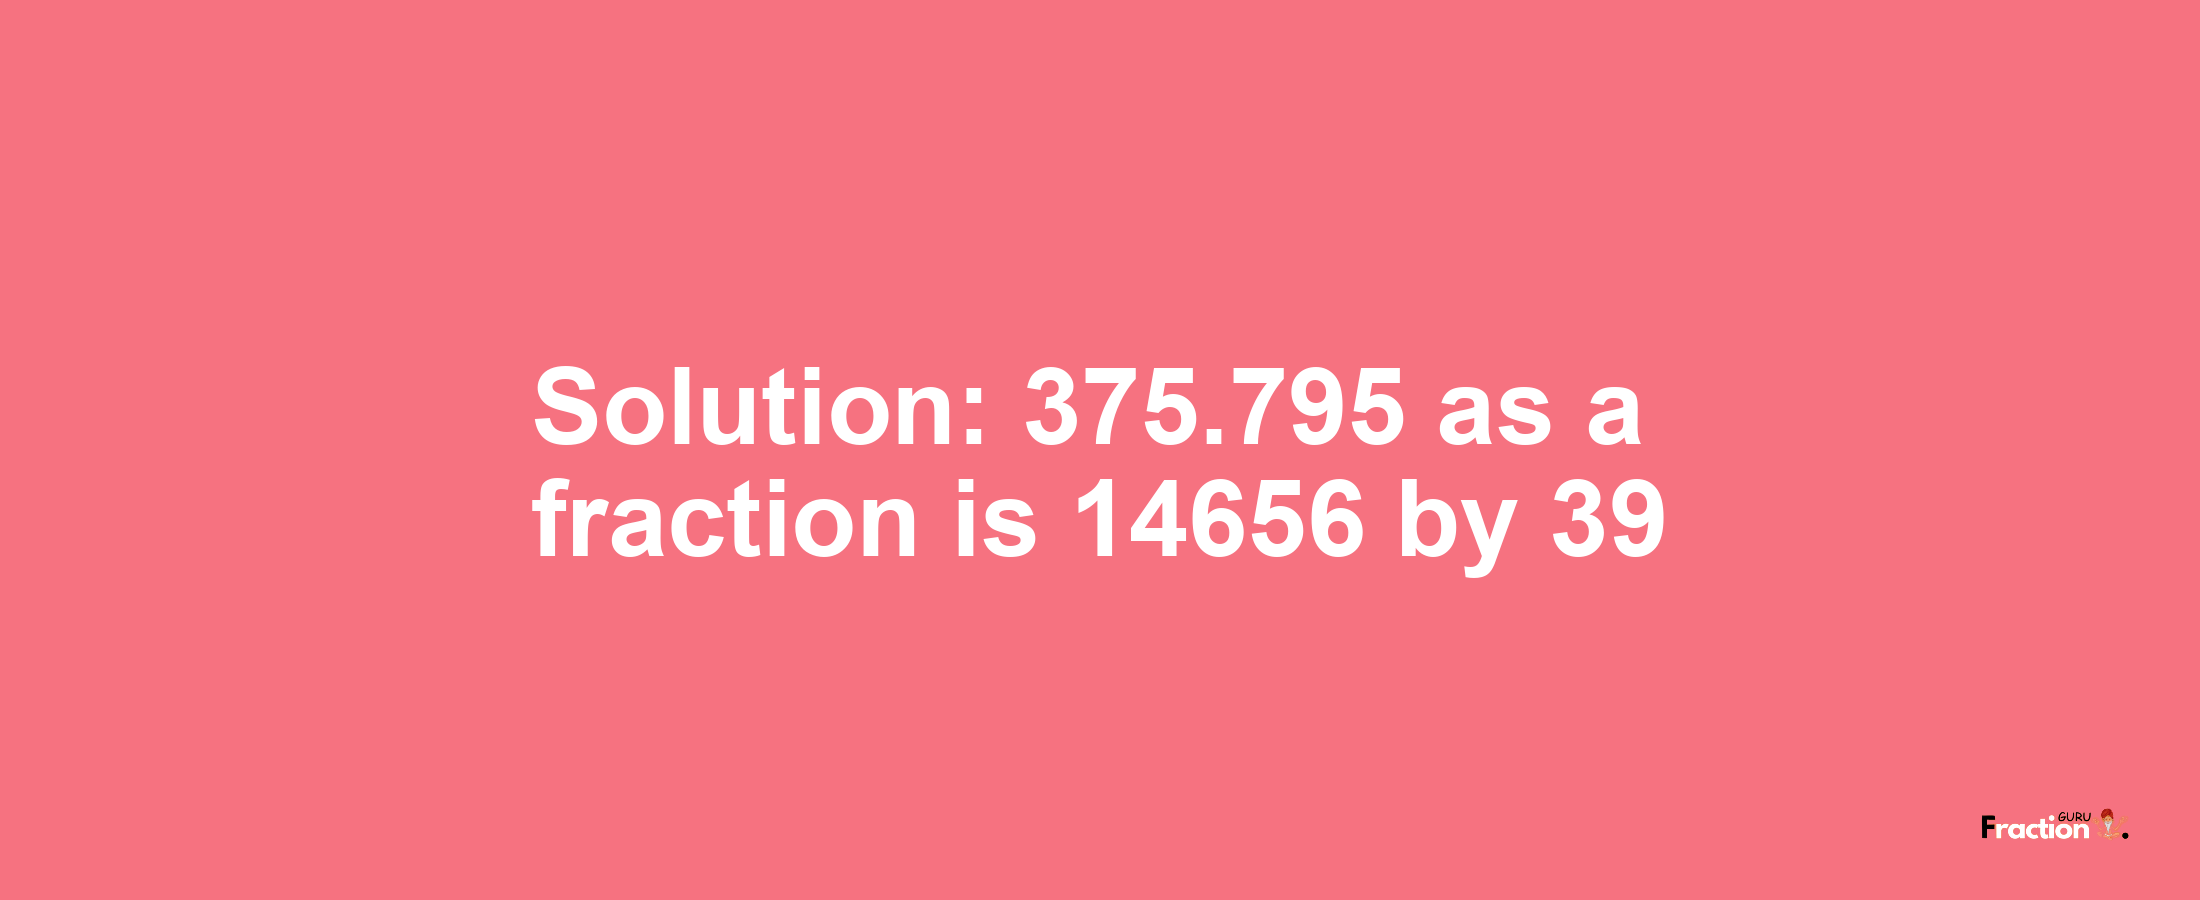 Solution:375.795 as a fraction is 14656/39